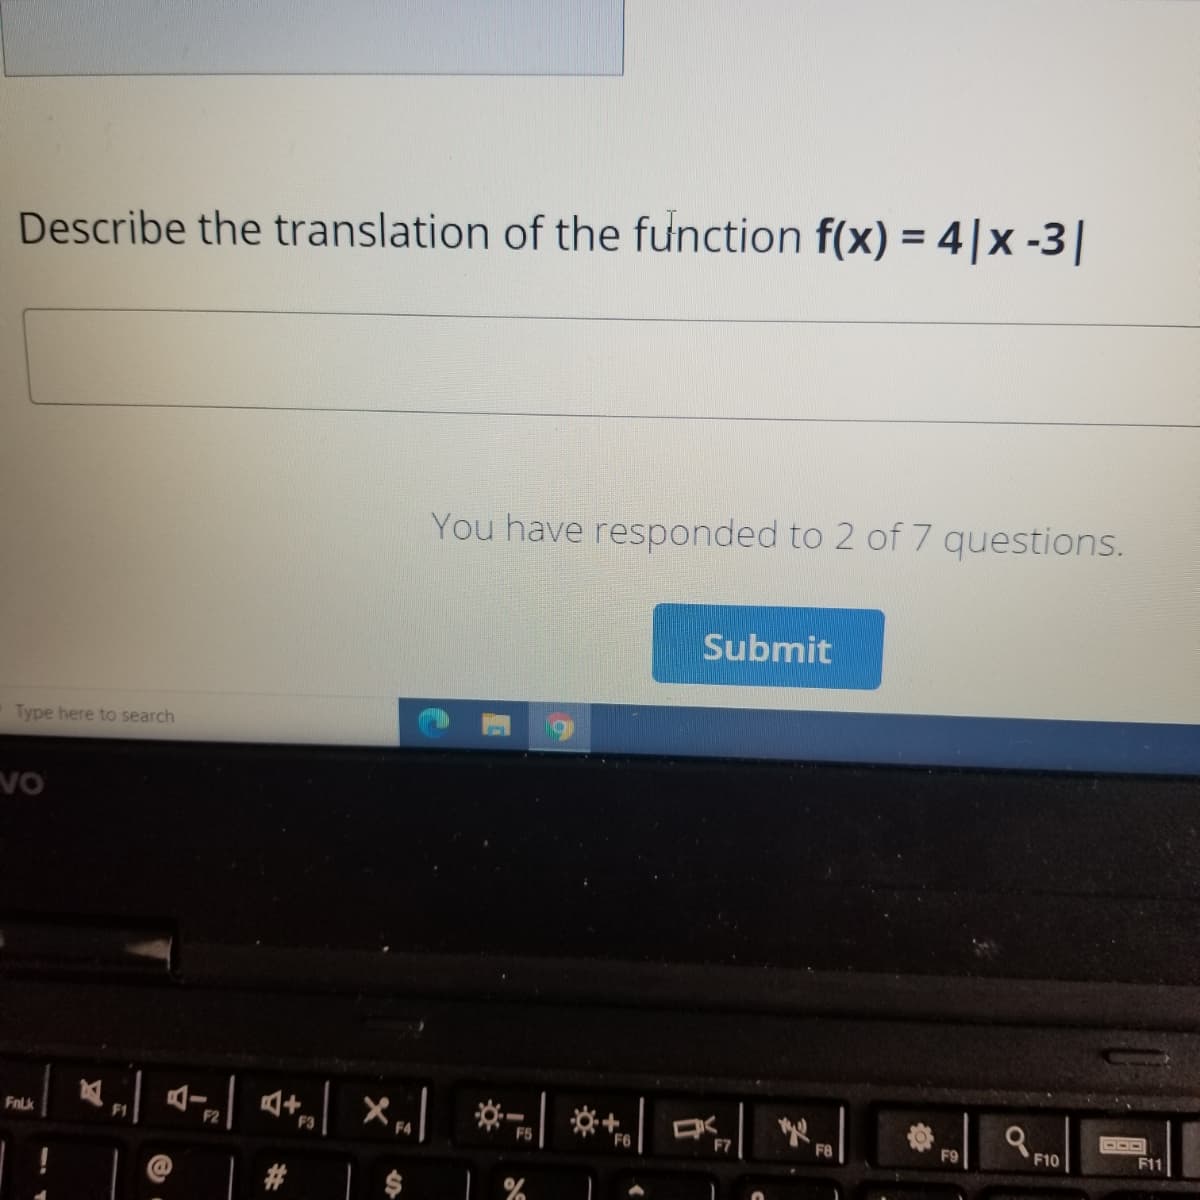 Describe the translation of the function f(x) = 4|x -3|
You have responded to 2 of 7 questions.
Submit
Type here to search
4- 4+,| ×„] *- ** a
a FID
FnLk
F2
F8
F9
F10
F11
# | $ %
